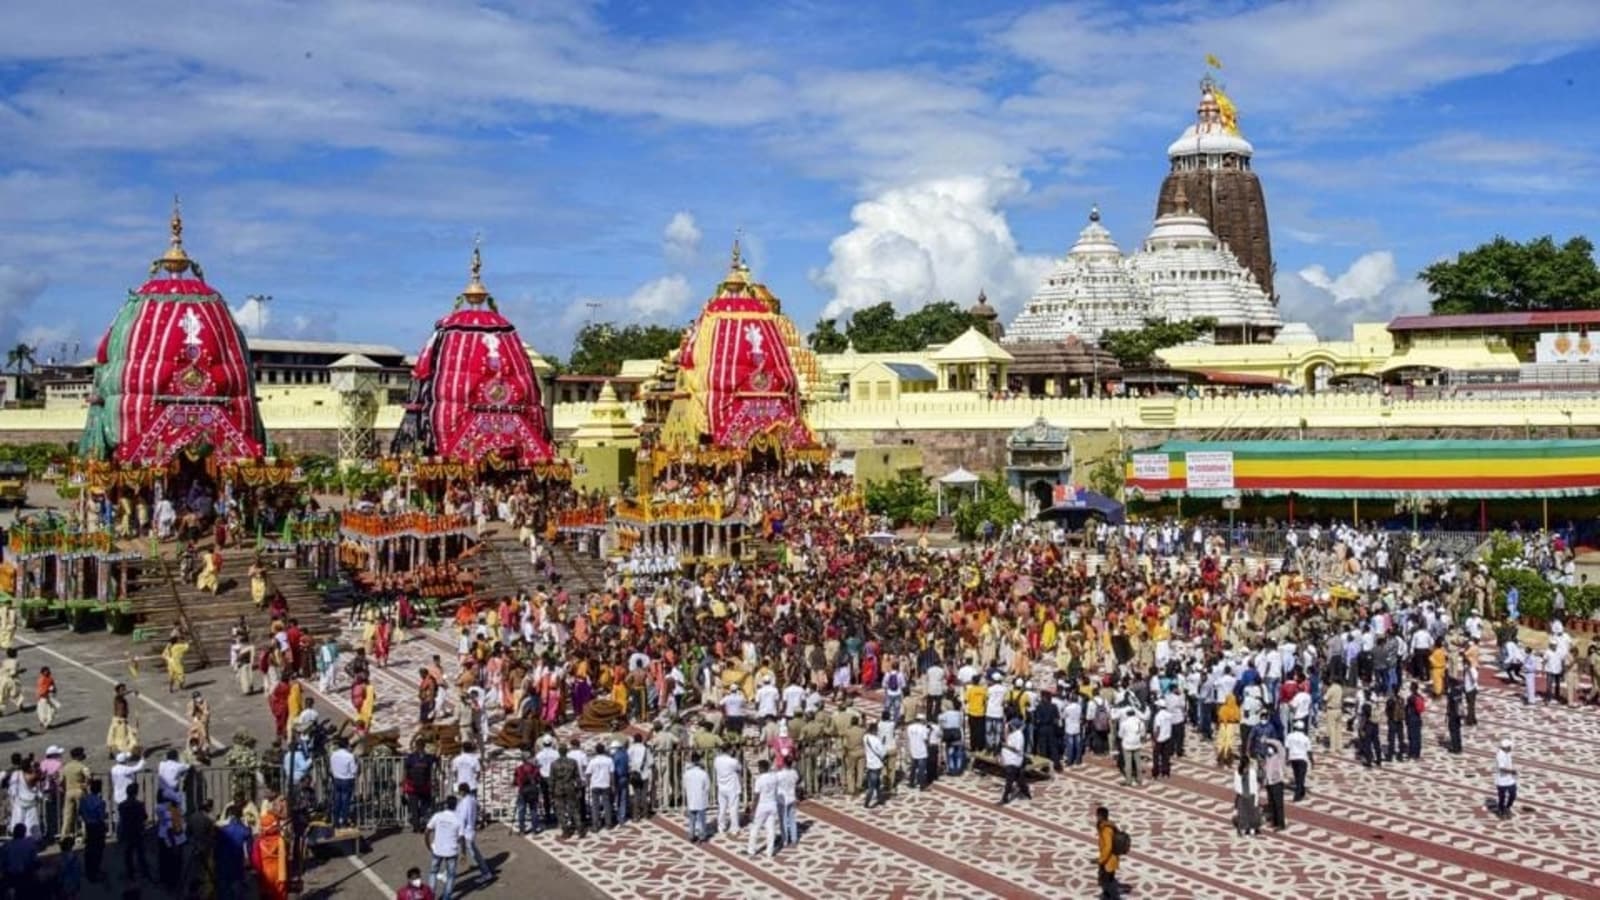 Puri&#39;s Jagannath Temple to reopen for devotees in 2nd phase from today.  Check guidelines | Latest News India - Hindustan Times